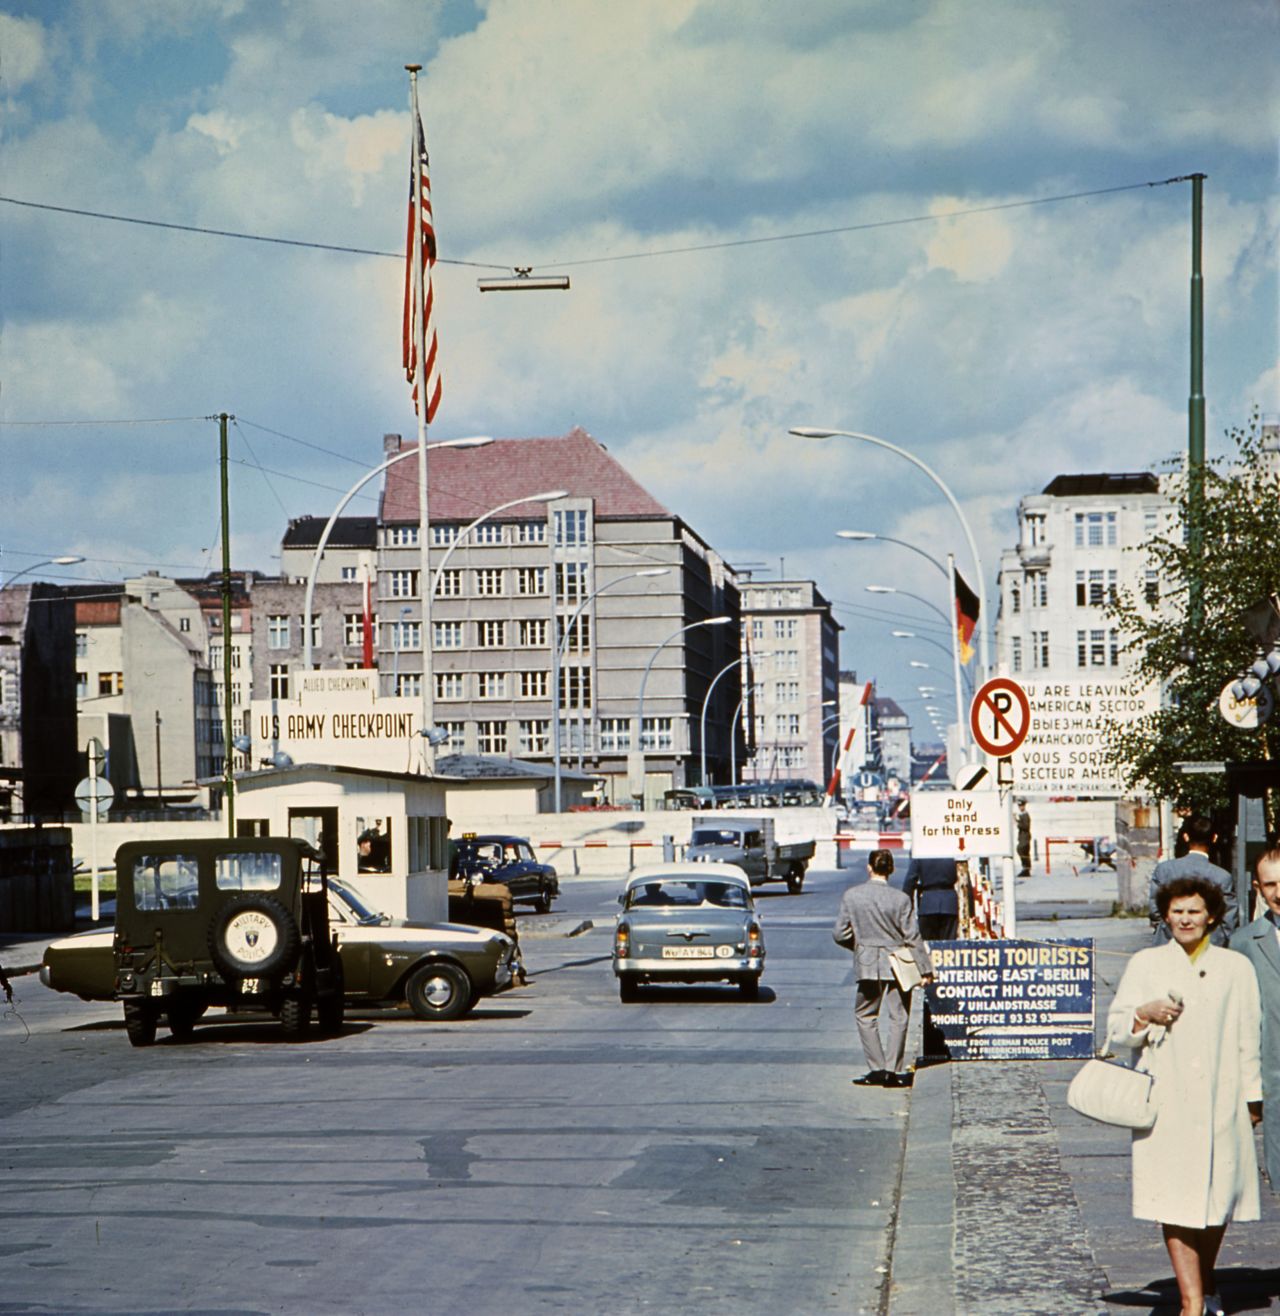 Checkpoint Charlie (pictured in 1968) was the most famous checkpoint along the Berlin Wall. Pleitgen's father worked in East Berlin, and Pleitgen says he travelled through the wall every day to go to kindergarten.